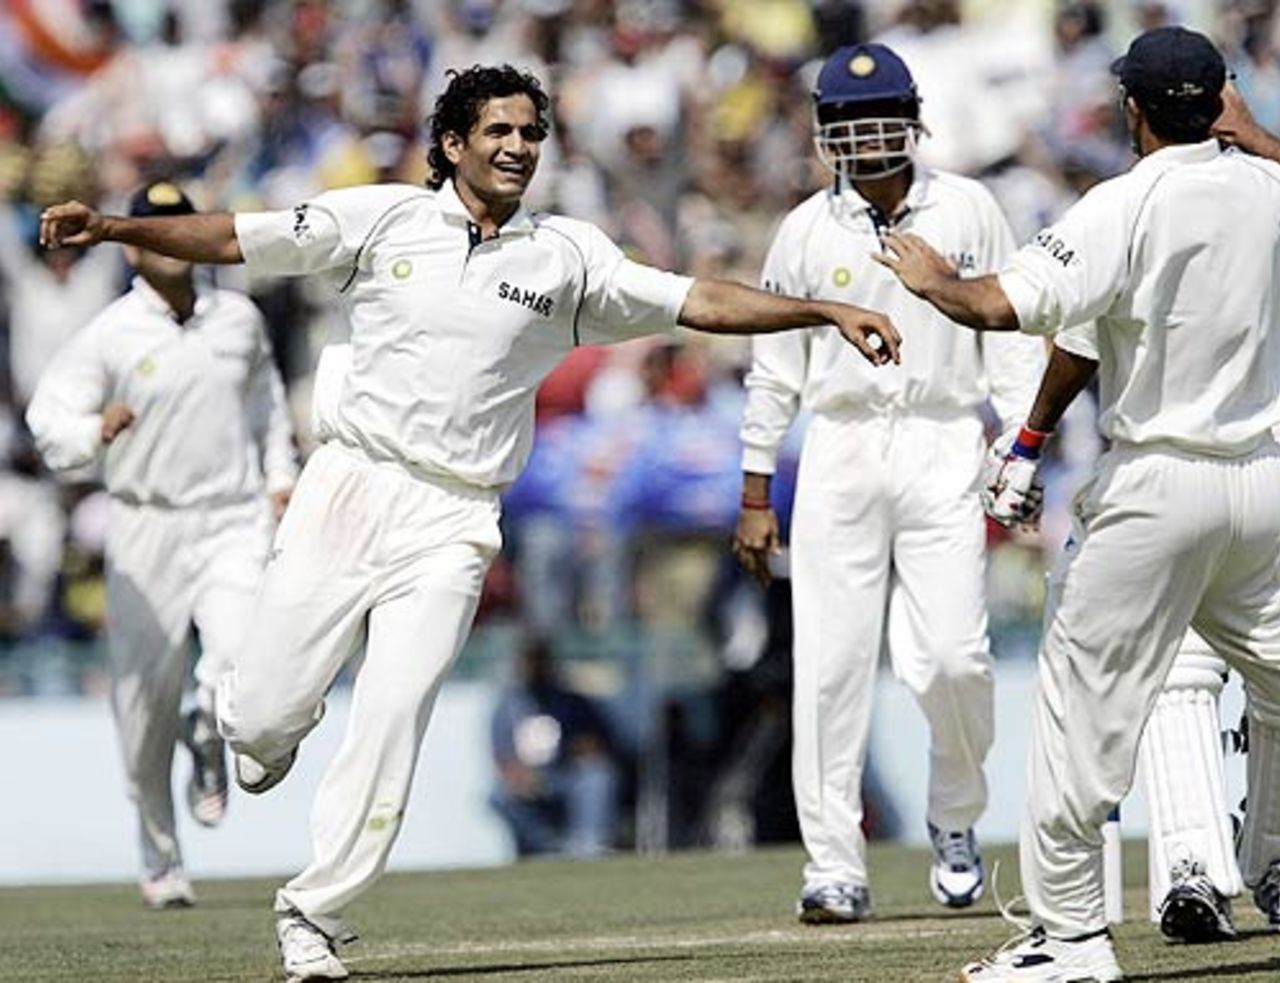 Irfan Pathan celebrates with his teammates after dismissing Yousuf Youhana in Mohali, India v Pakistan, March 8, 2005